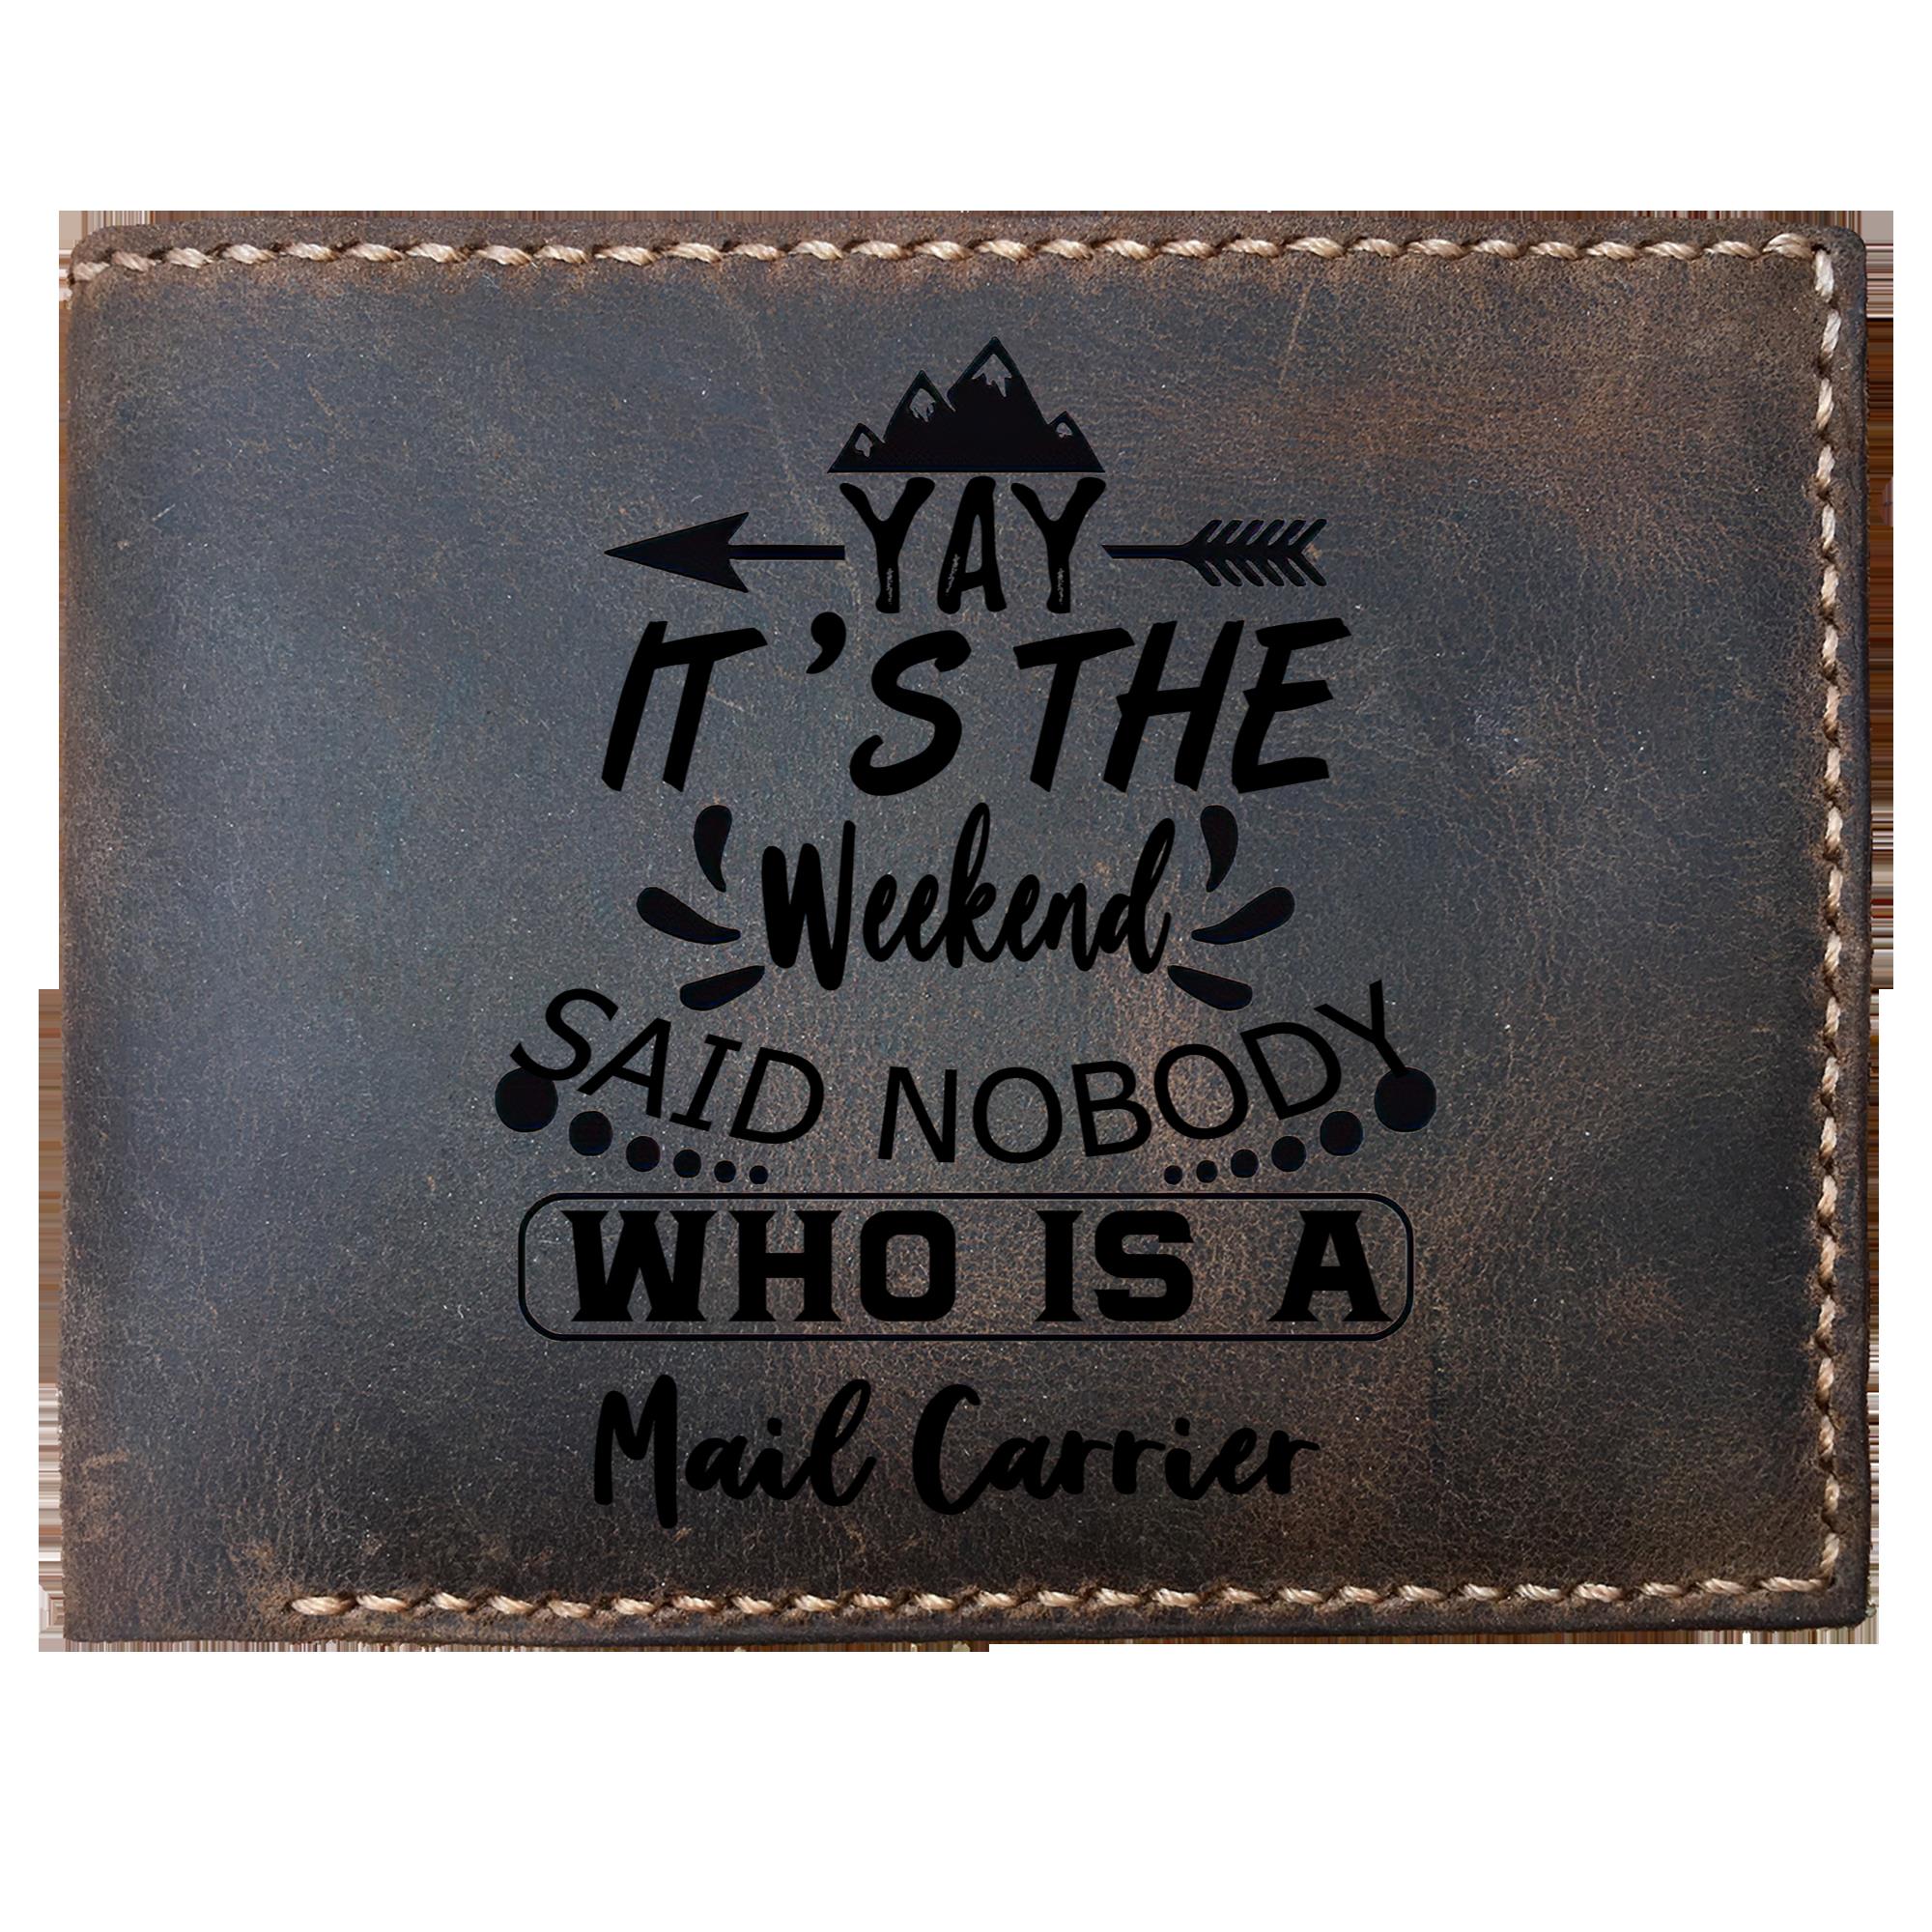 Skitongifts Funny Custom Laser Engraved Bifold Leather Wallet For Men, It's The Weekend Said Nobody Who Is A Mail Carrier, Father's Day Gifts